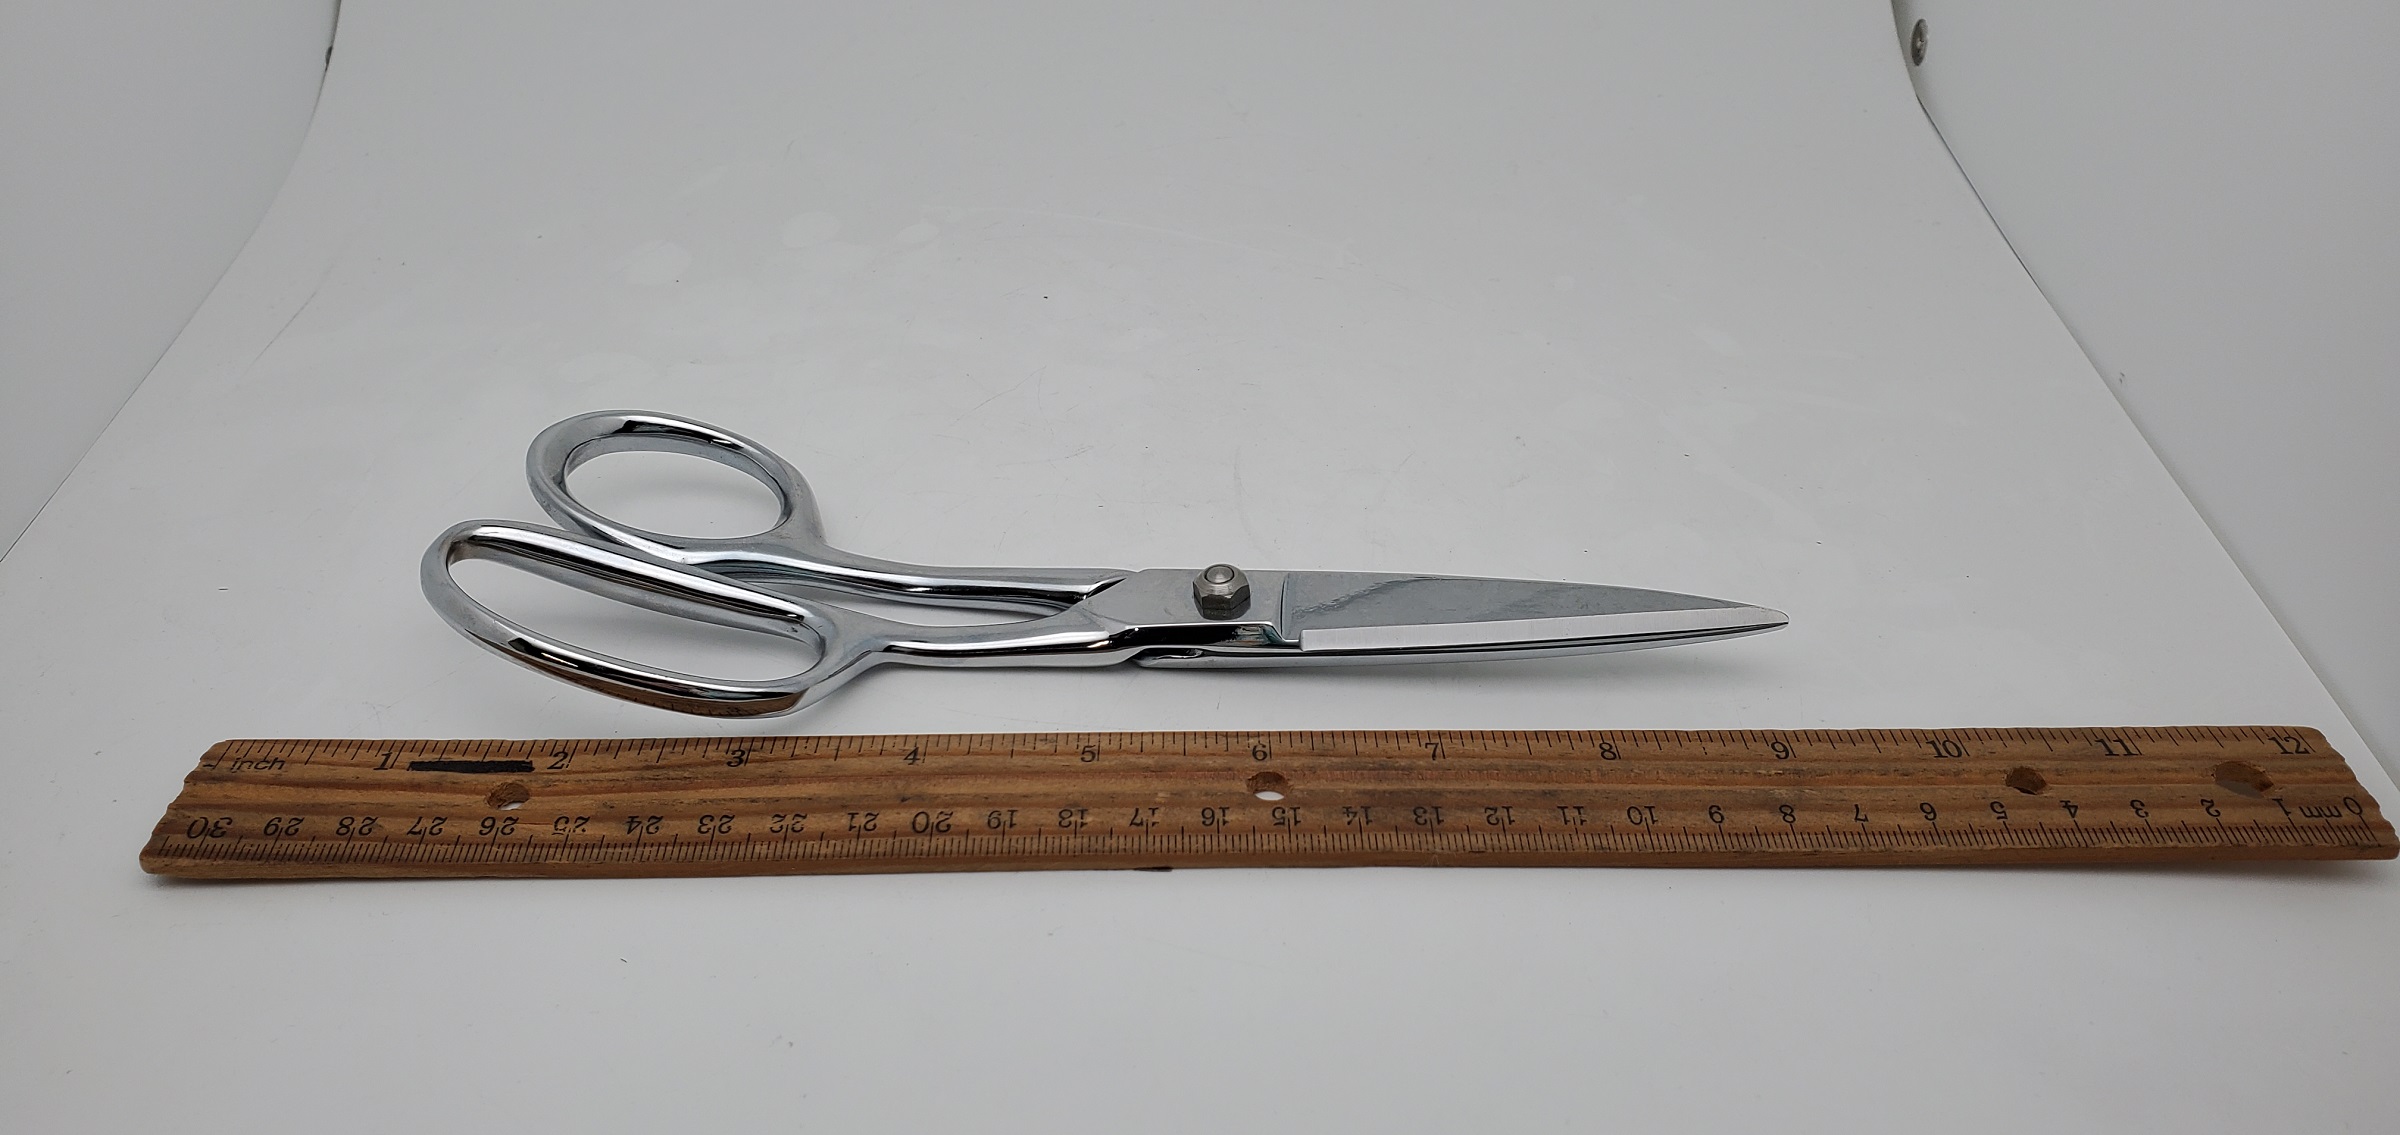 Gingher G-220570-1001 Industrial Rug Shears